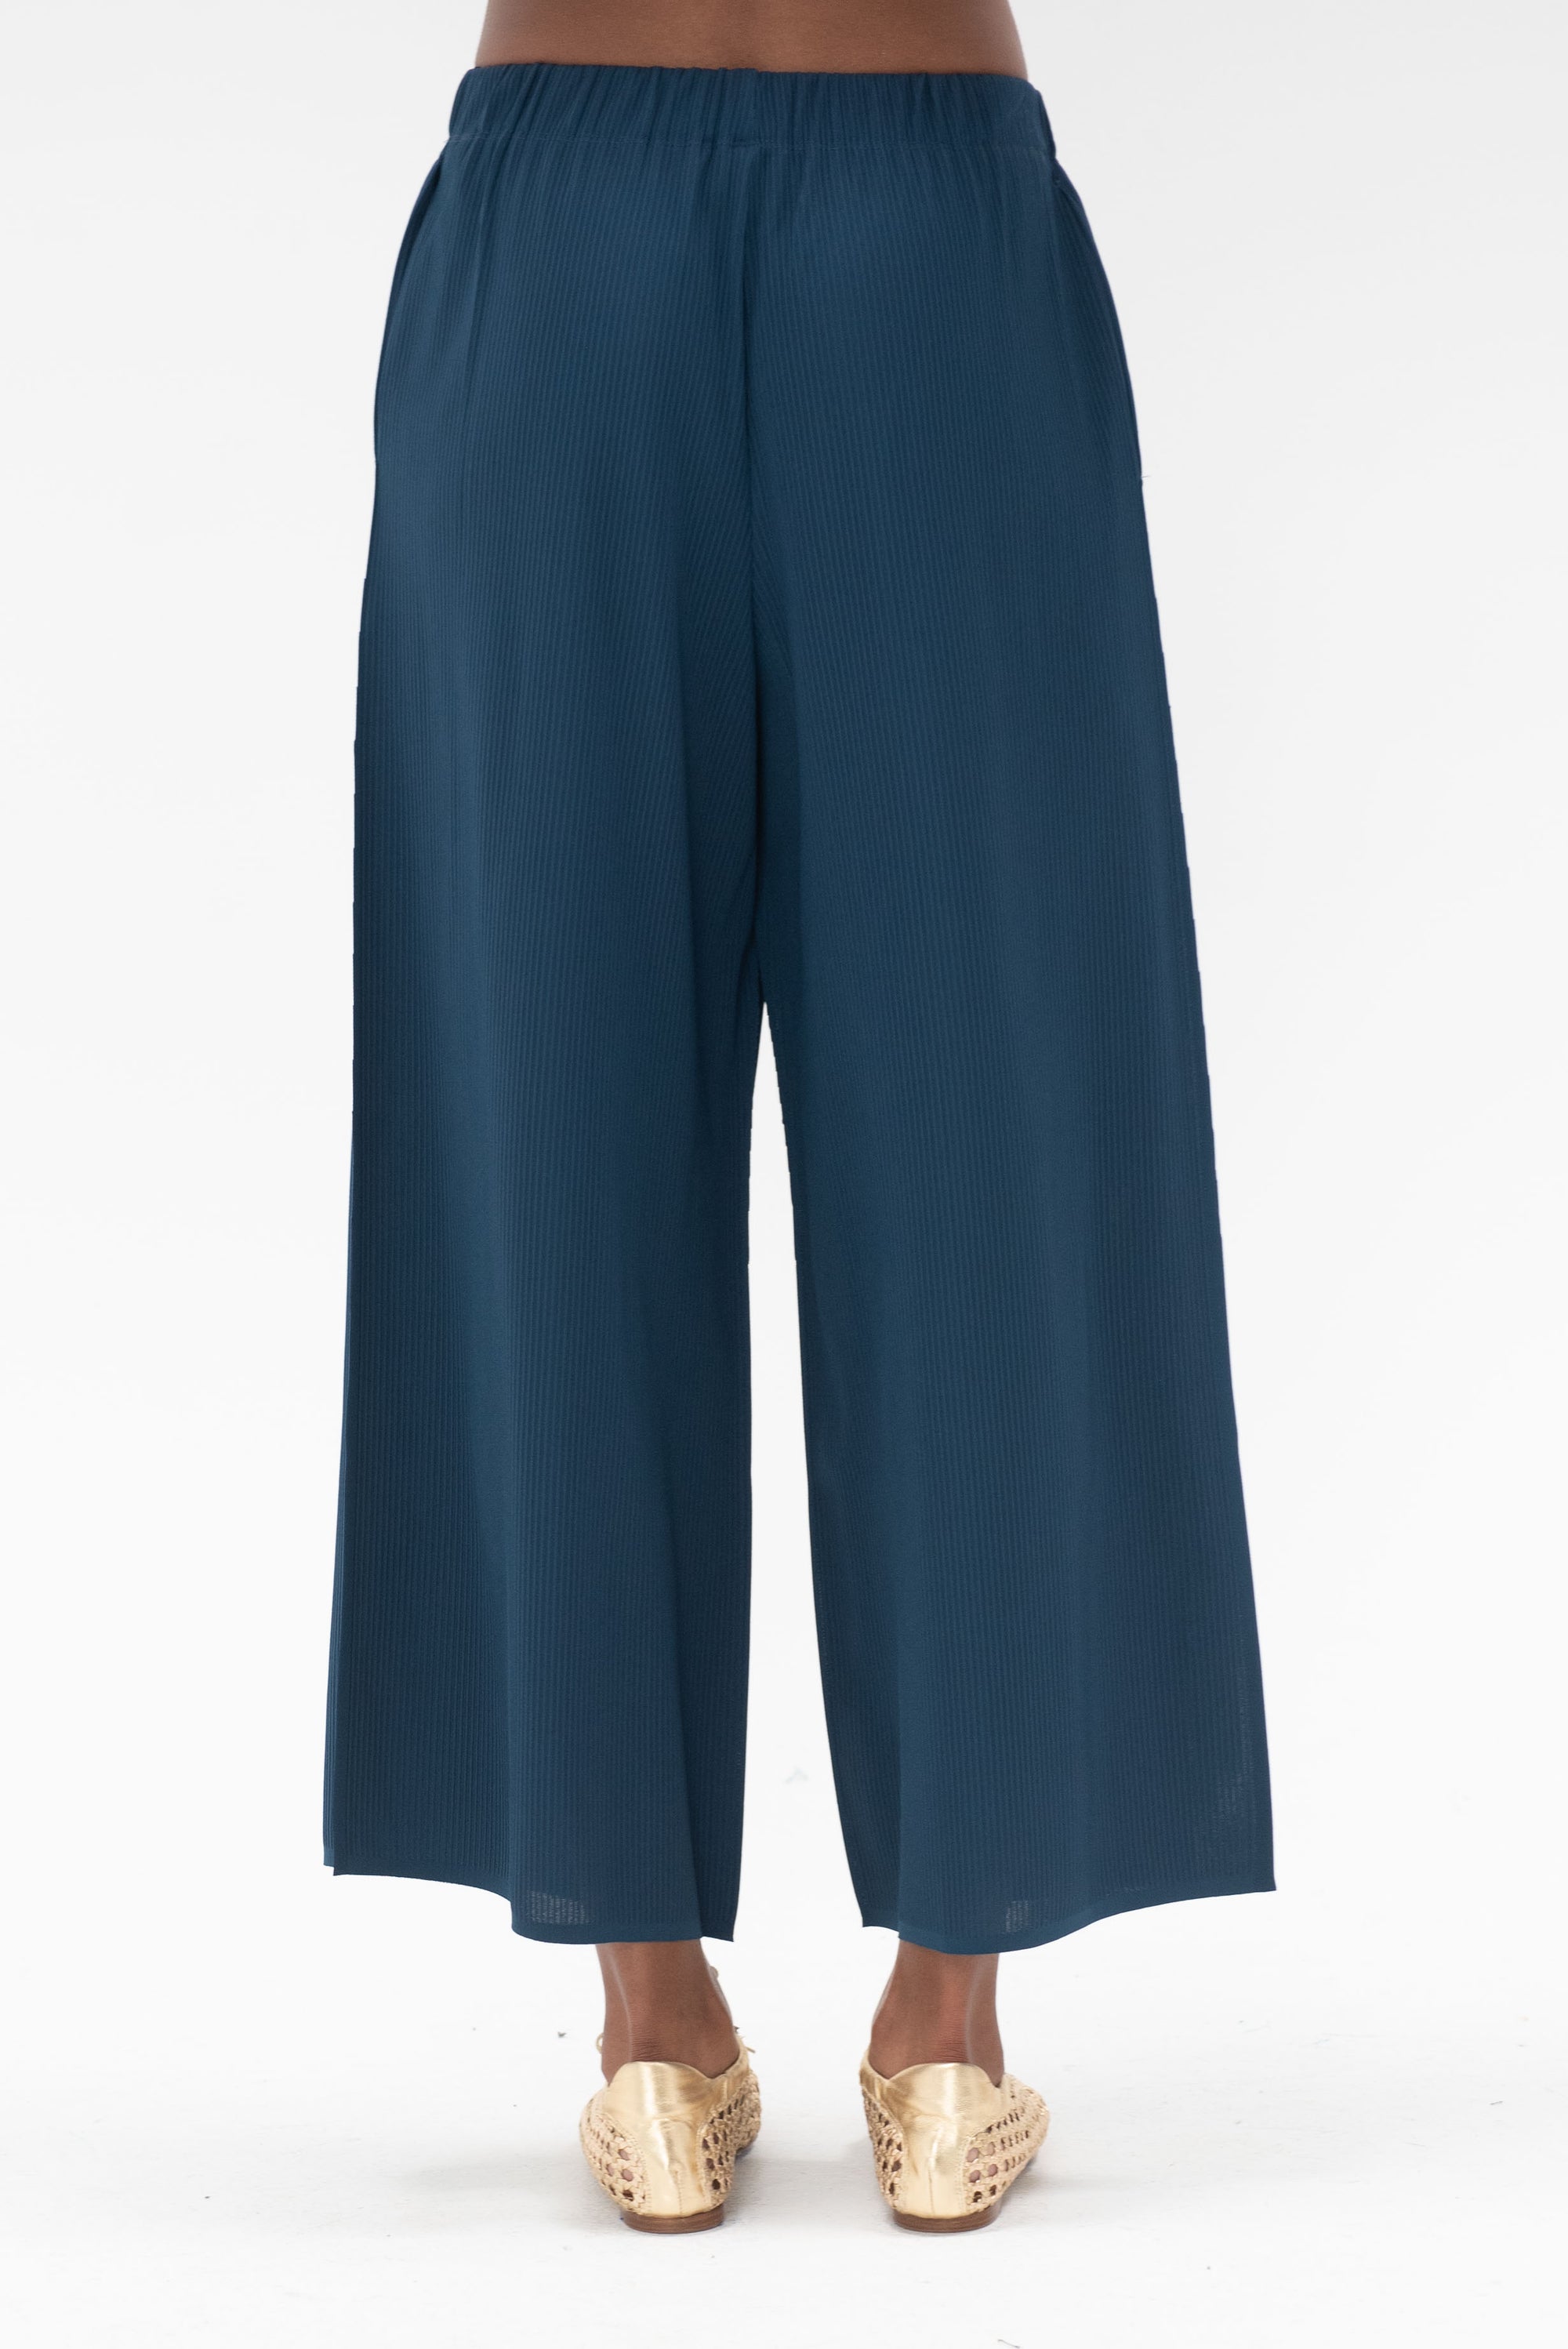 Pleats Please by Issey Miyake - A-Poc Form Pant, Navy